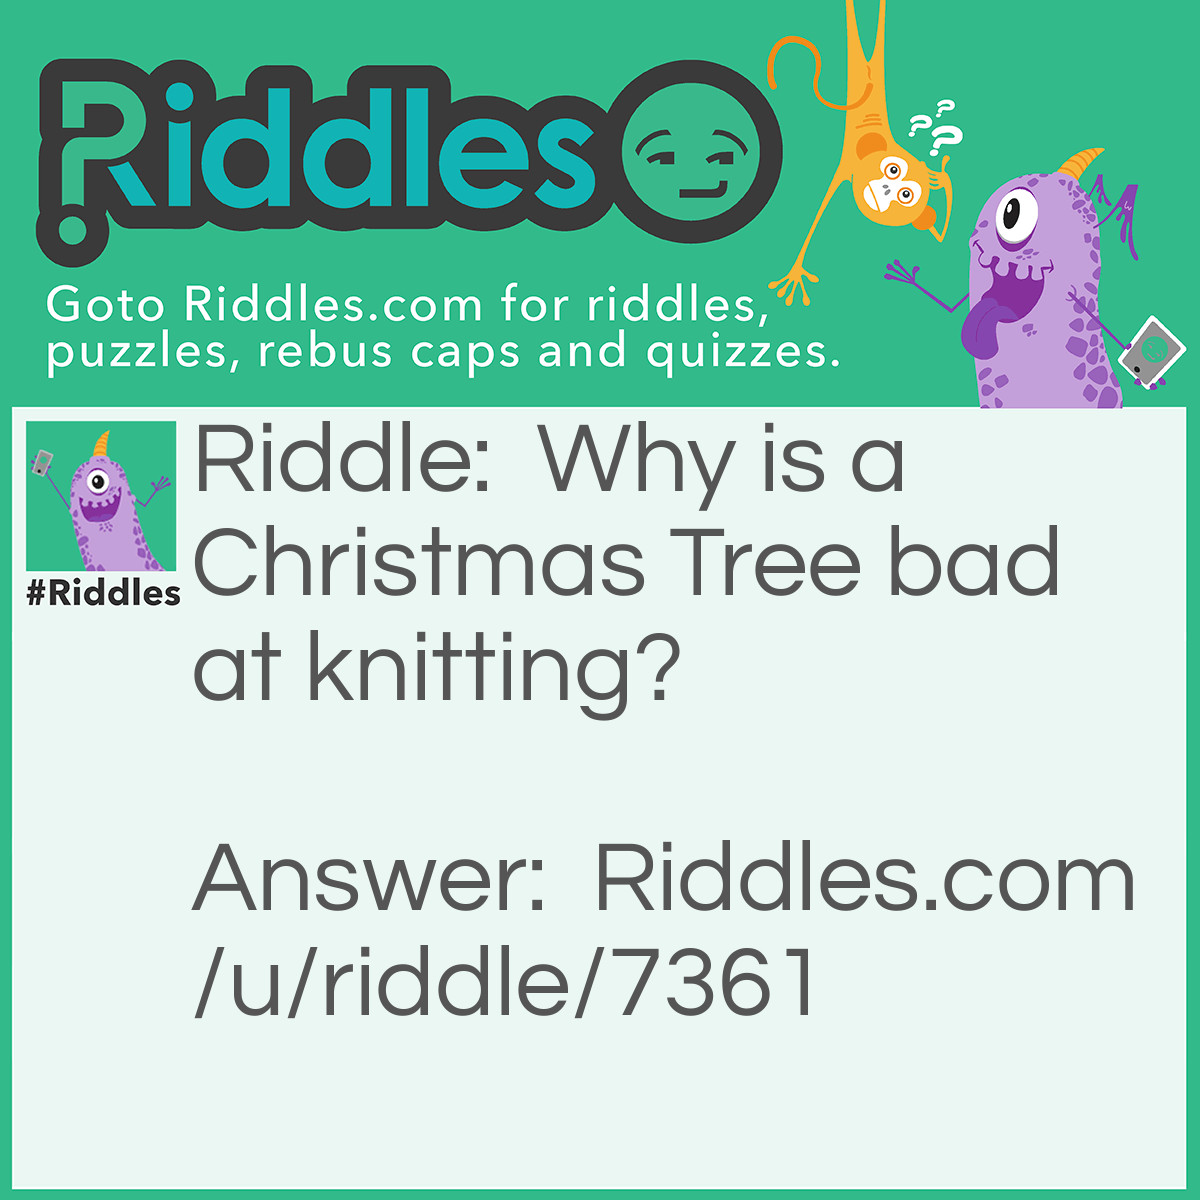 Riddle: Why is a Christmas Tree bad at knitting? Answer: Because it is always losing its needles!